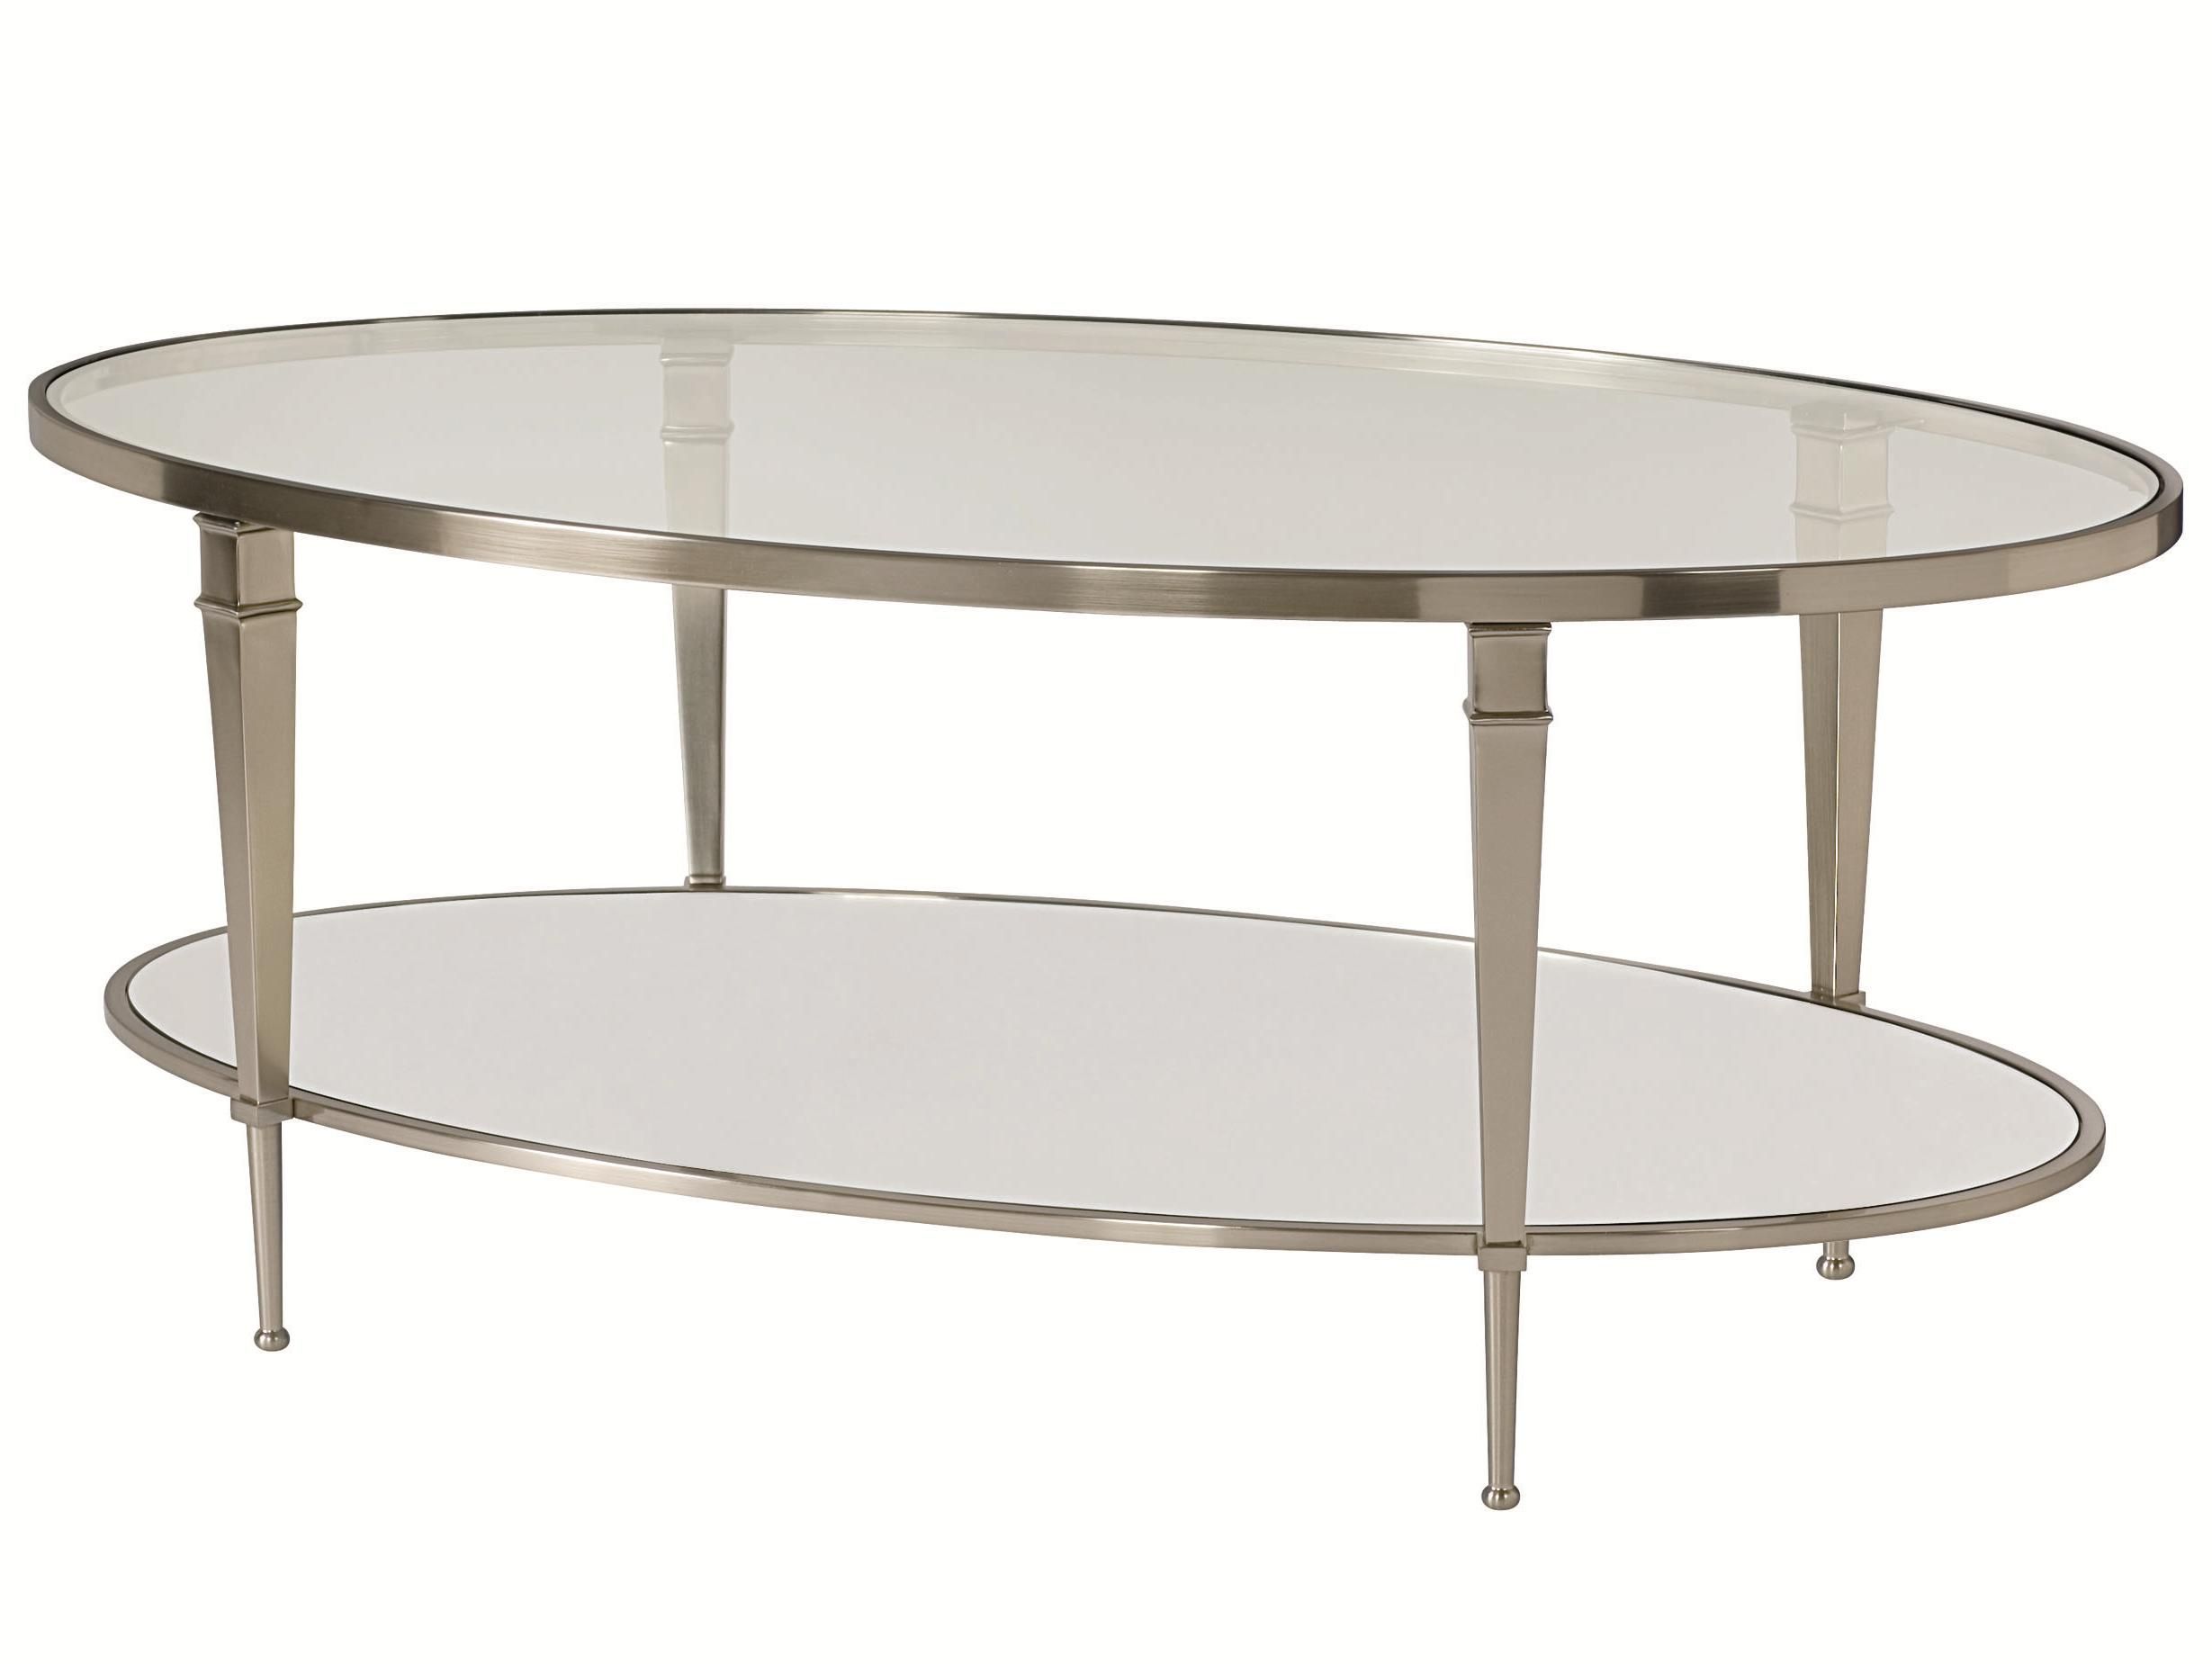 Oval Satin Nickel Antique Mirror Finish Cocktail Table Throughout Mirrored And Silver Cocktail Tables (View 13 of 15)